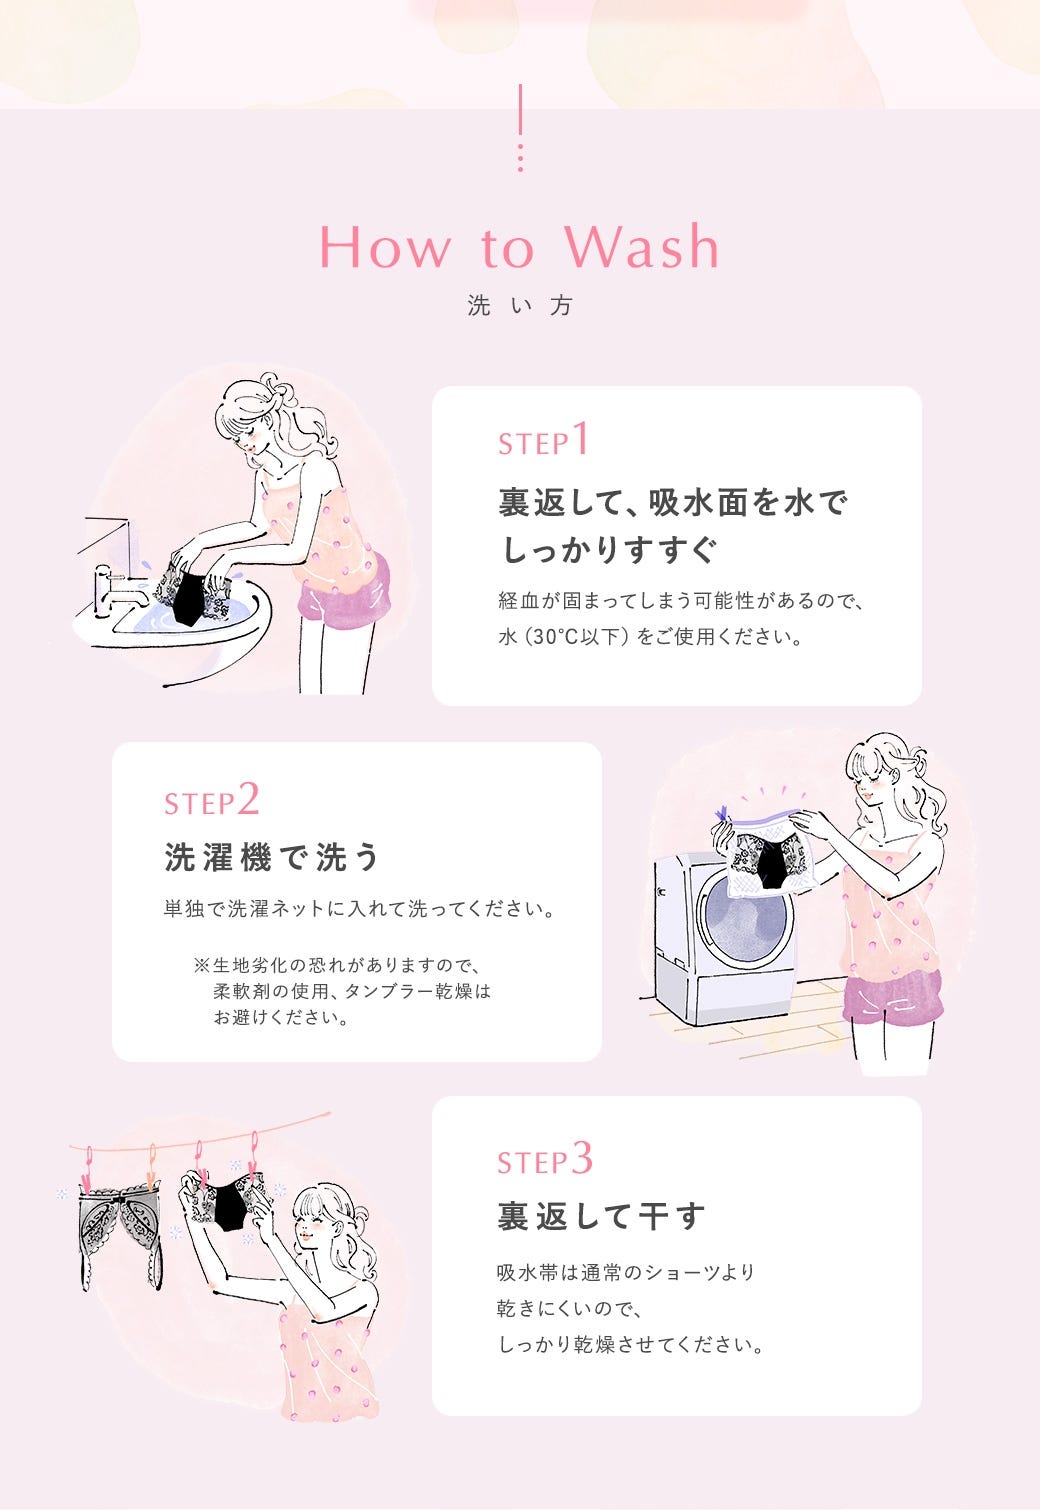 How to Wash